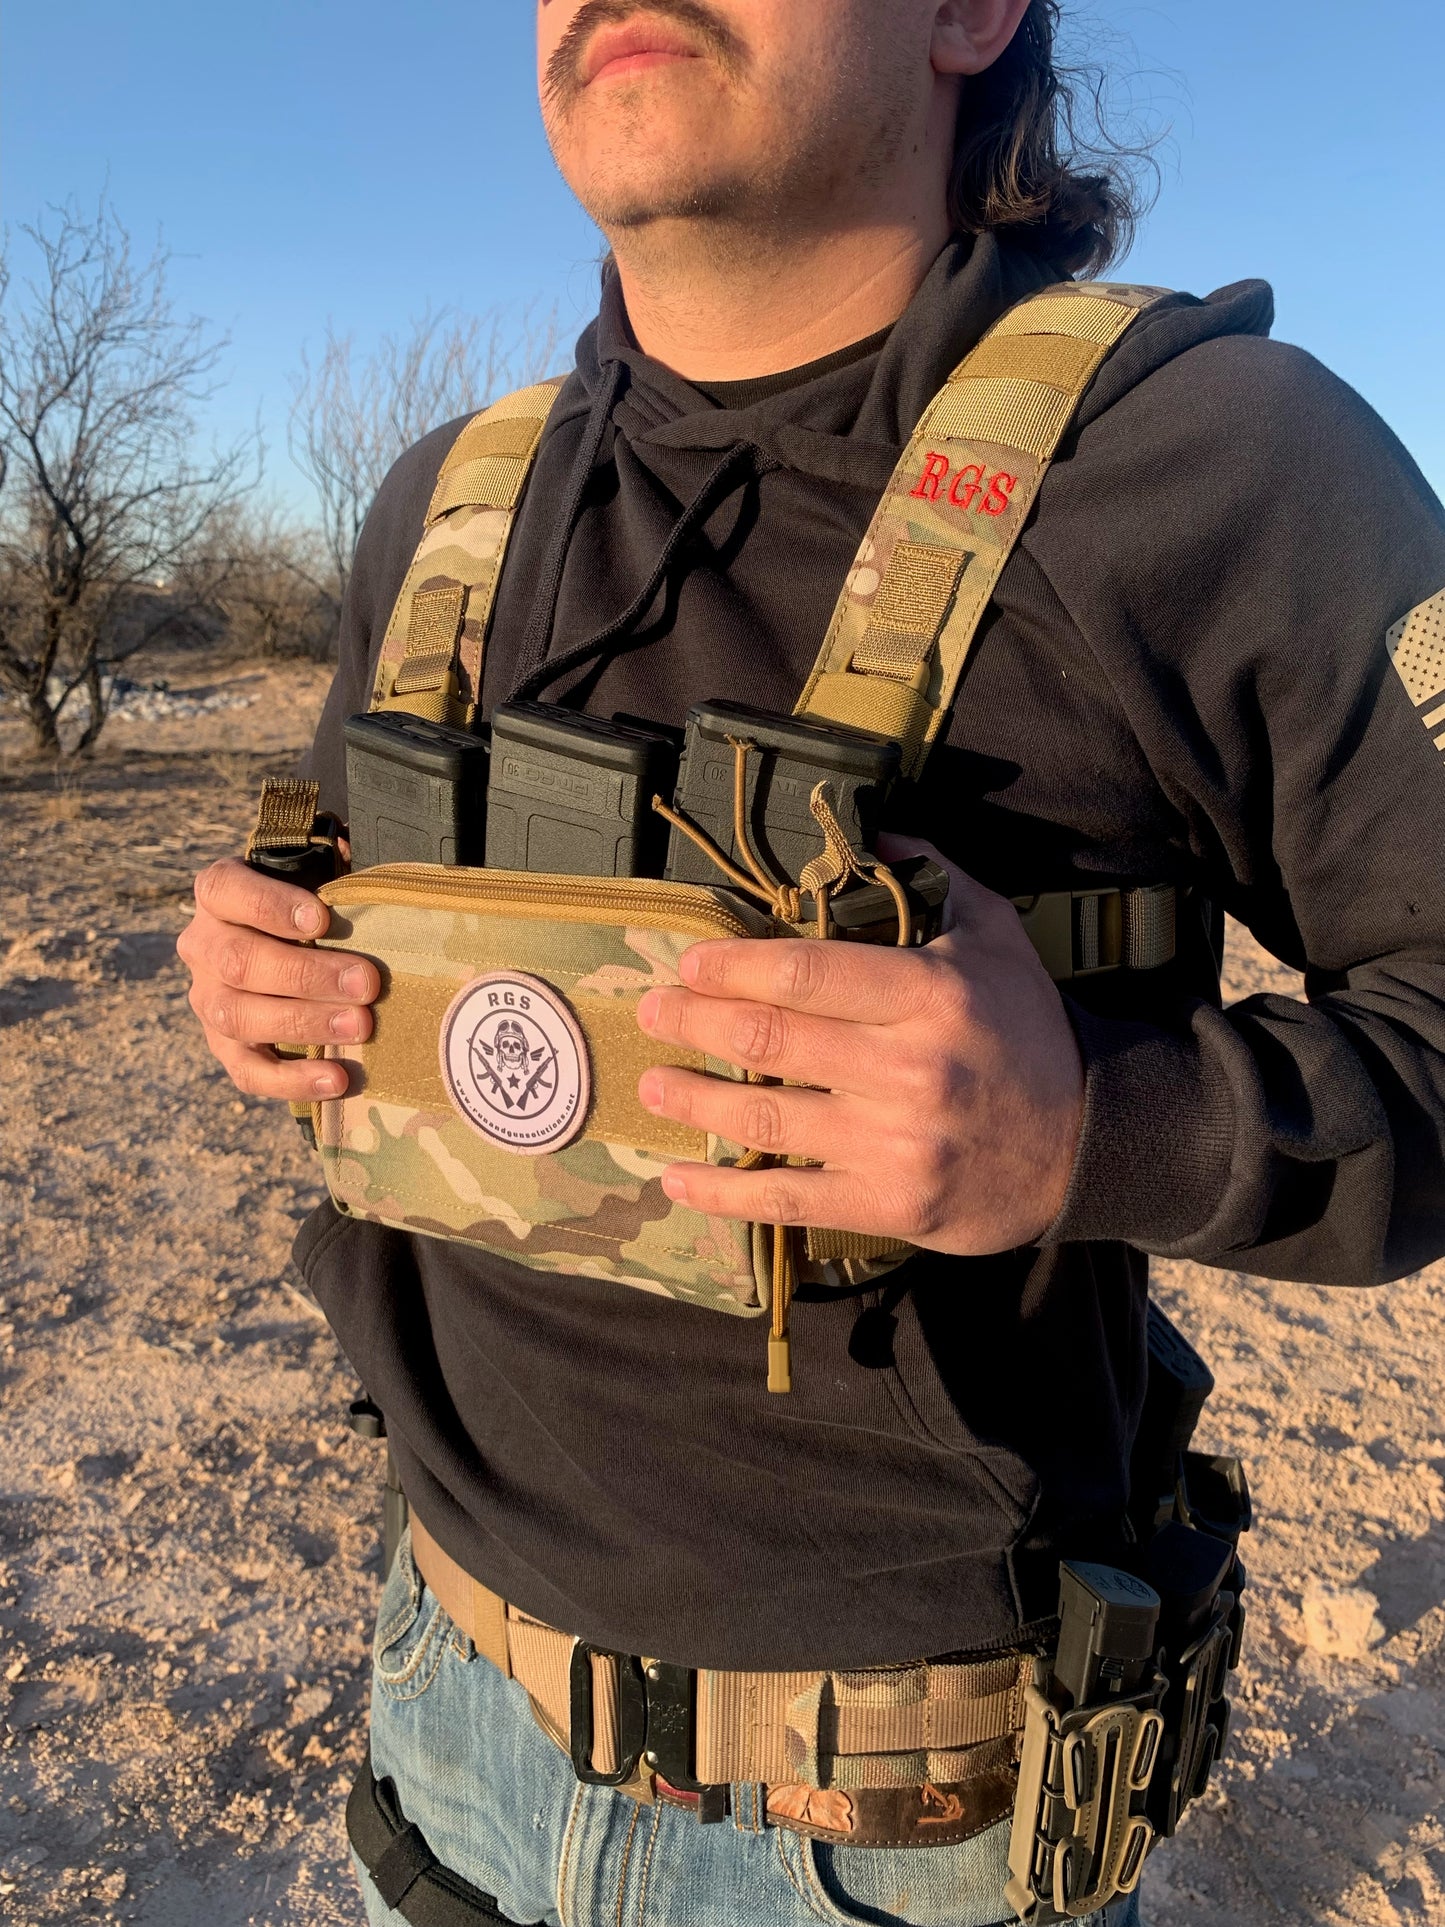 RGS RECON/Lightweight H- Harness Style Chest Rig